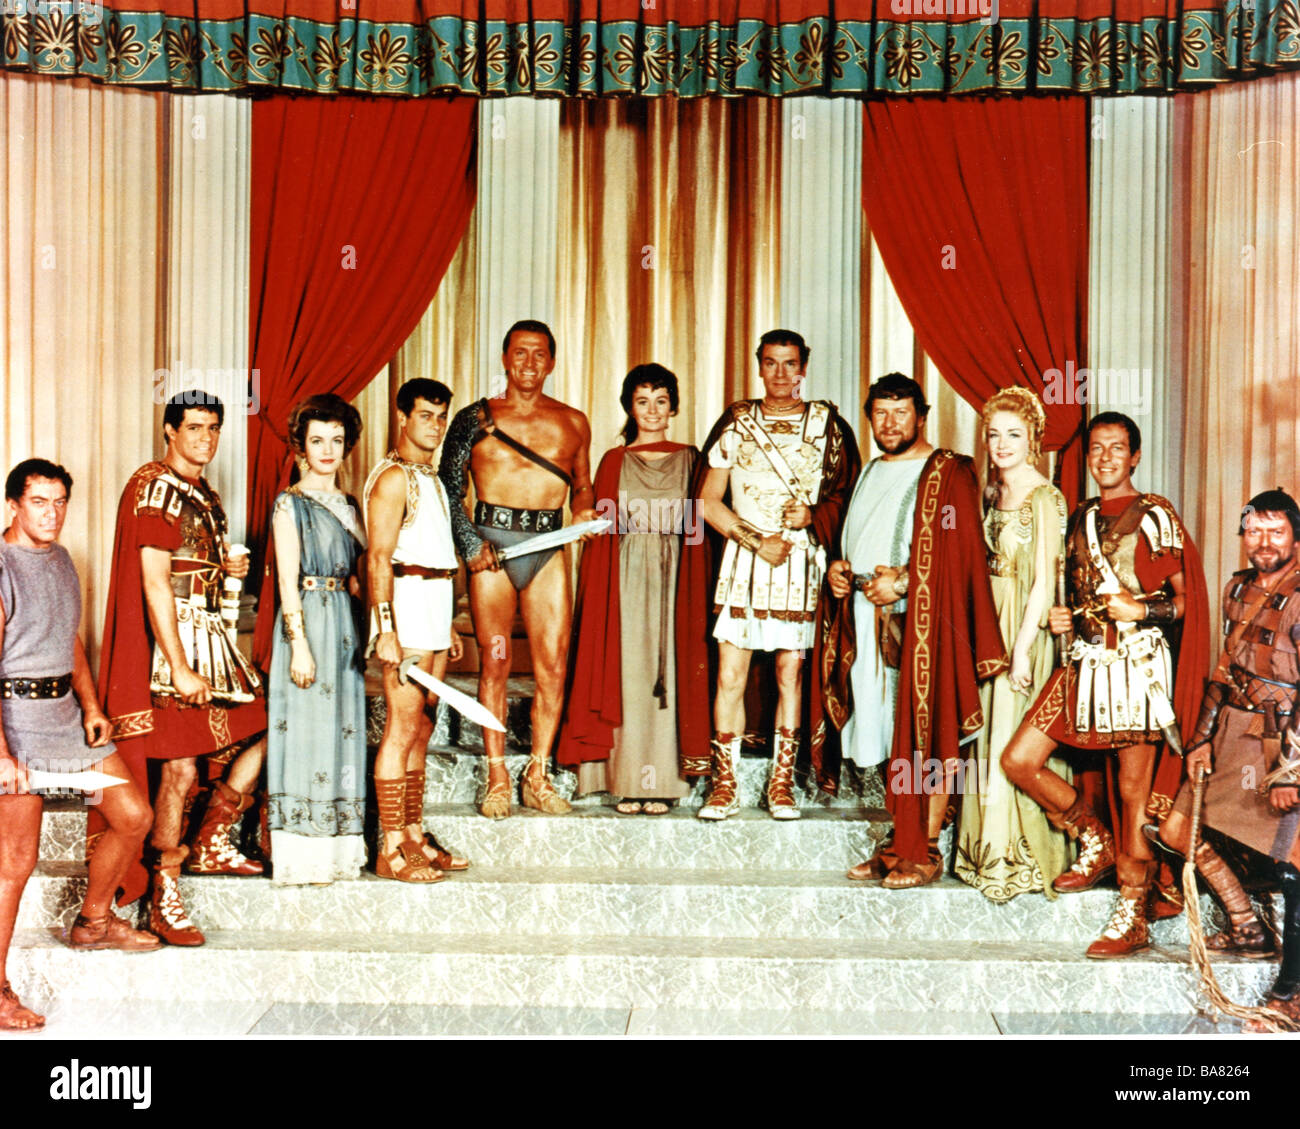 SPARTACUS  1952 RKO film. Principals from l: Tony Curtis in white, Kirk Douglas, Jean Simmons, Laurence Olivier, Peter Ustinov Stock Photo